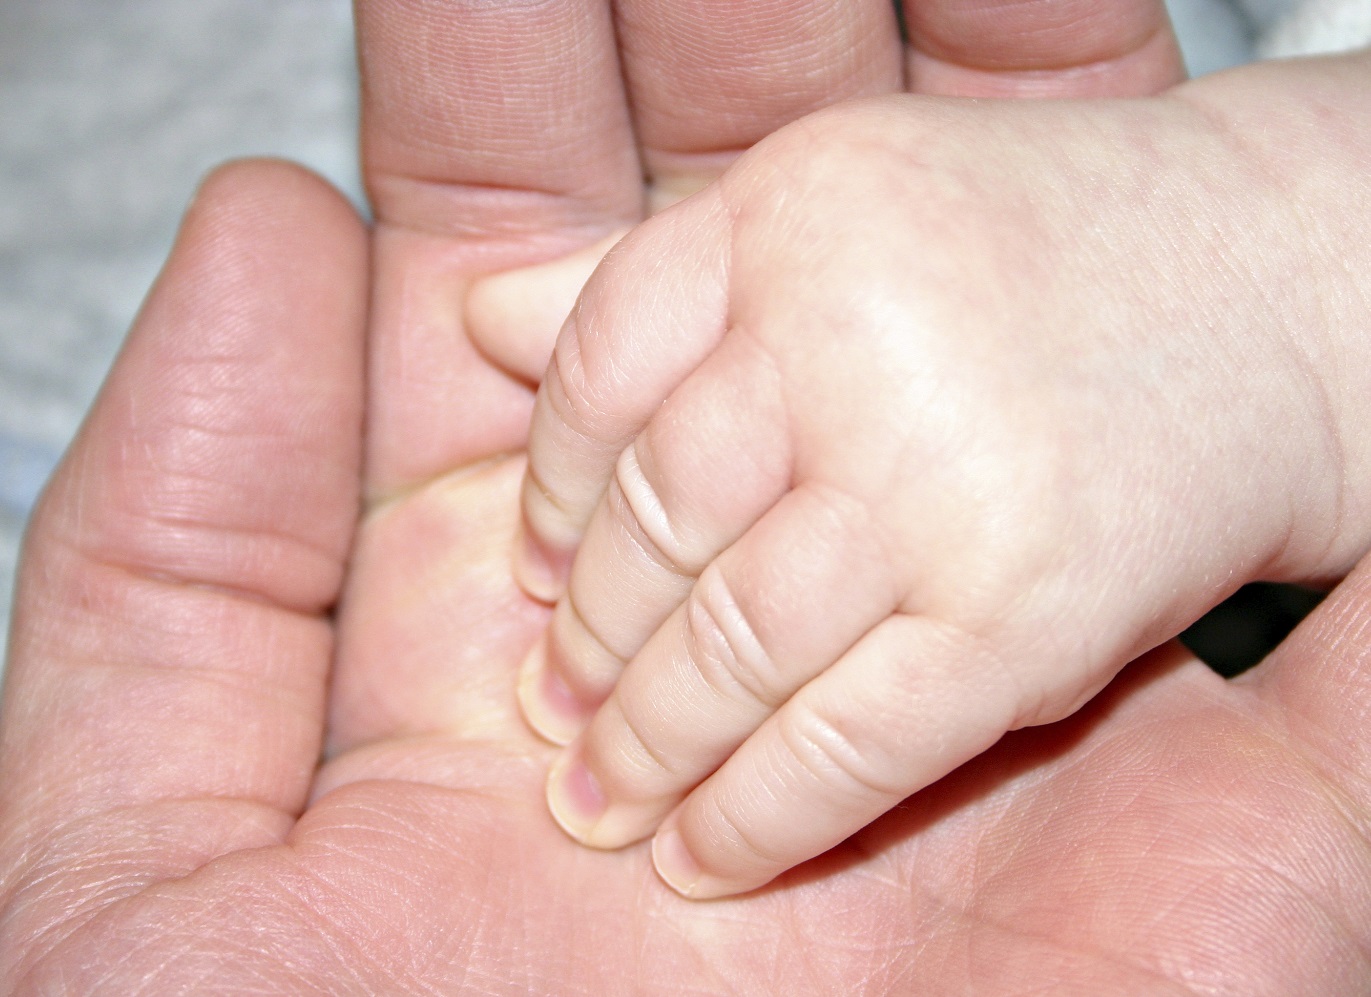 An infant hand in an adult hand